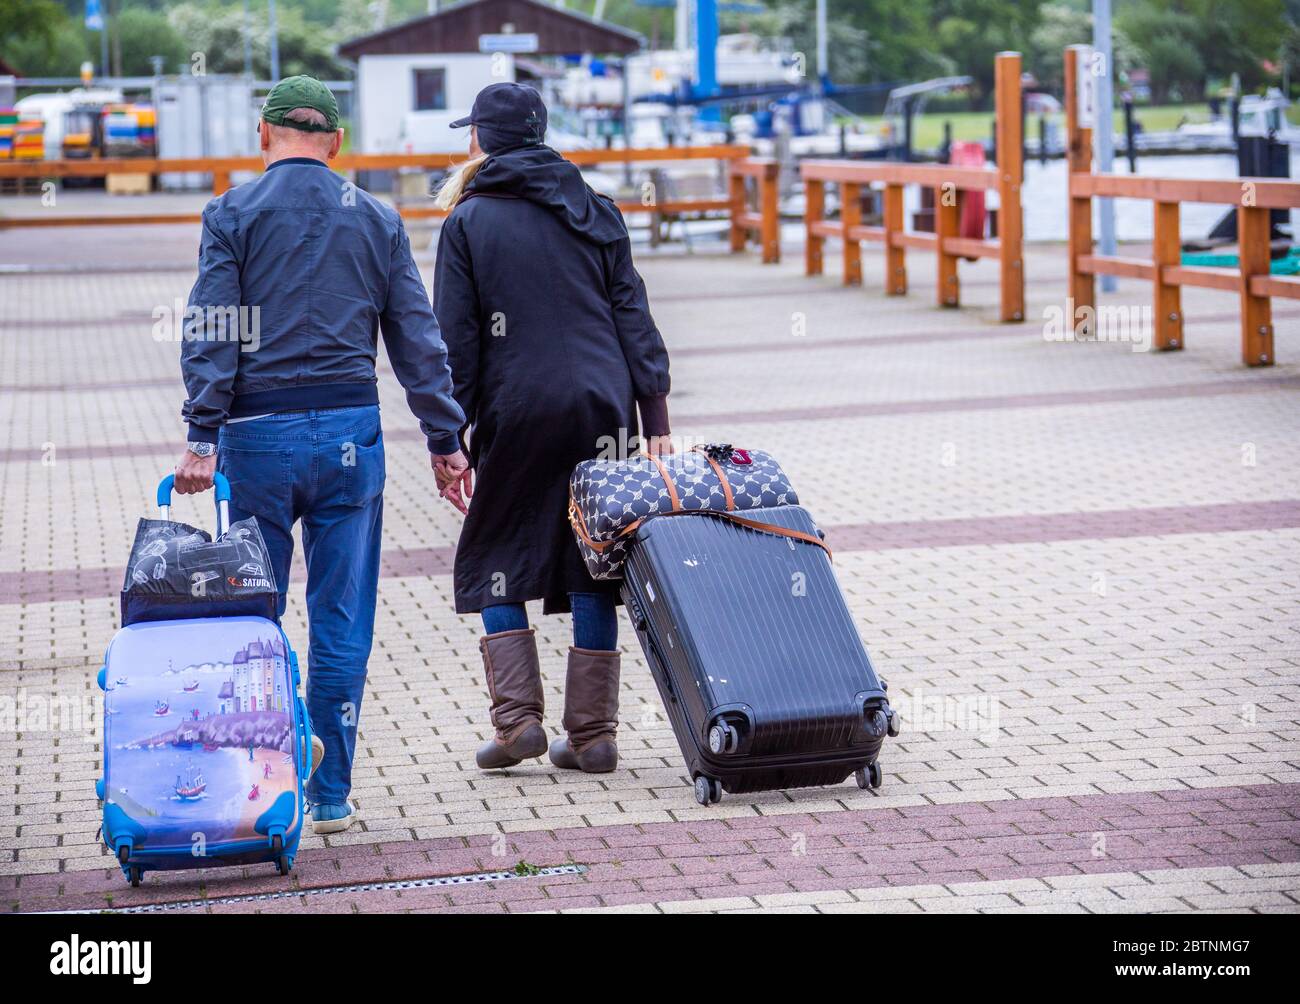 25 May 2020, Mecklenburg-Western Pomerania, Schaprode: The first holidaymakers return to the Baltic Sea after the Corona travel ban has been lifted. They pull out their suitcases in the port of Schaprode on Rügen to the ferry for the crossing to the Baltic Sea island of Hiddensee. Photo: Jens Büttner/dpa-Zentralbild/ZB Stock Photo